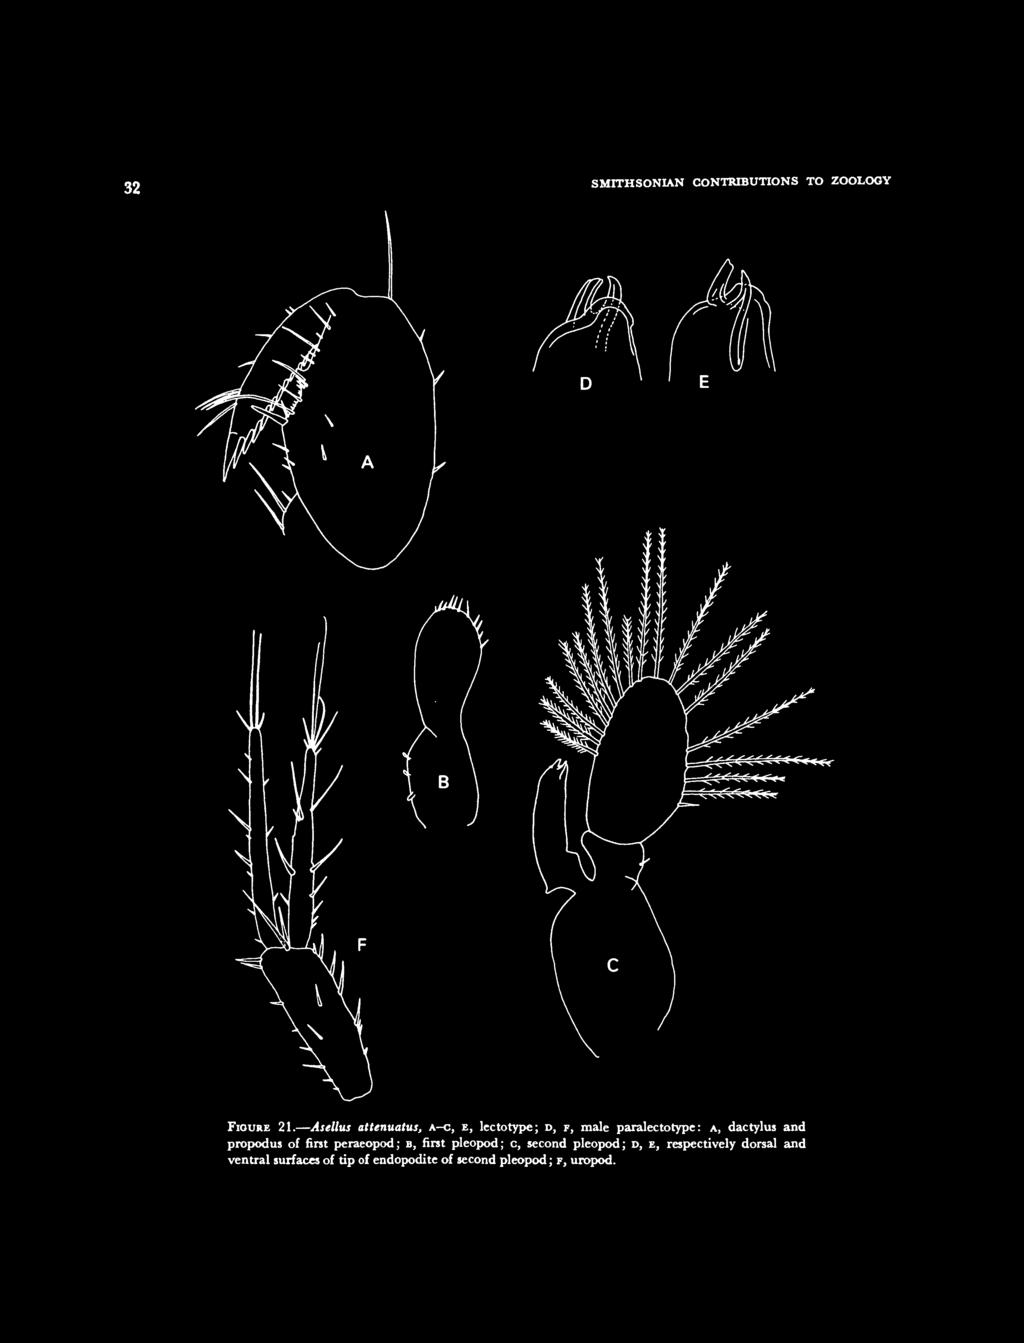 dactylus and propodus of first peraeopod; B, first pleopod; c, second